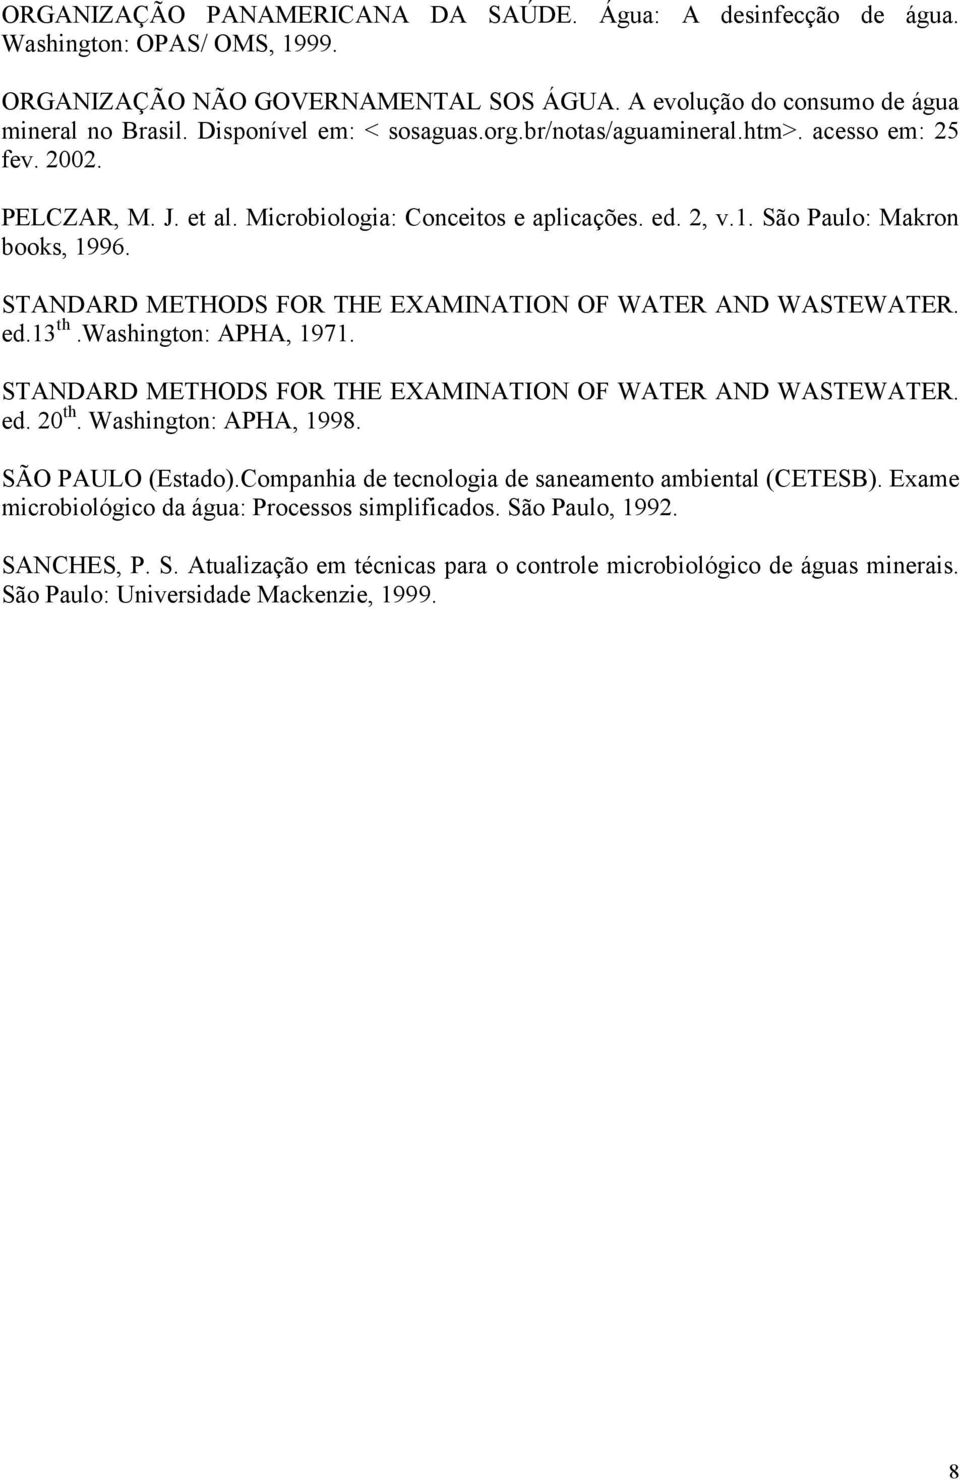 STANDARD METHODS FOR THE EXAMINATION OF WATER AND WASTEWATER. ed.13 th.washington: APHA, 1971. STANDARD METHODS FOR THE EXAMINATION OF WATER AND WASTEWATER. ed. 20 th. Washington: APHA, 1998.